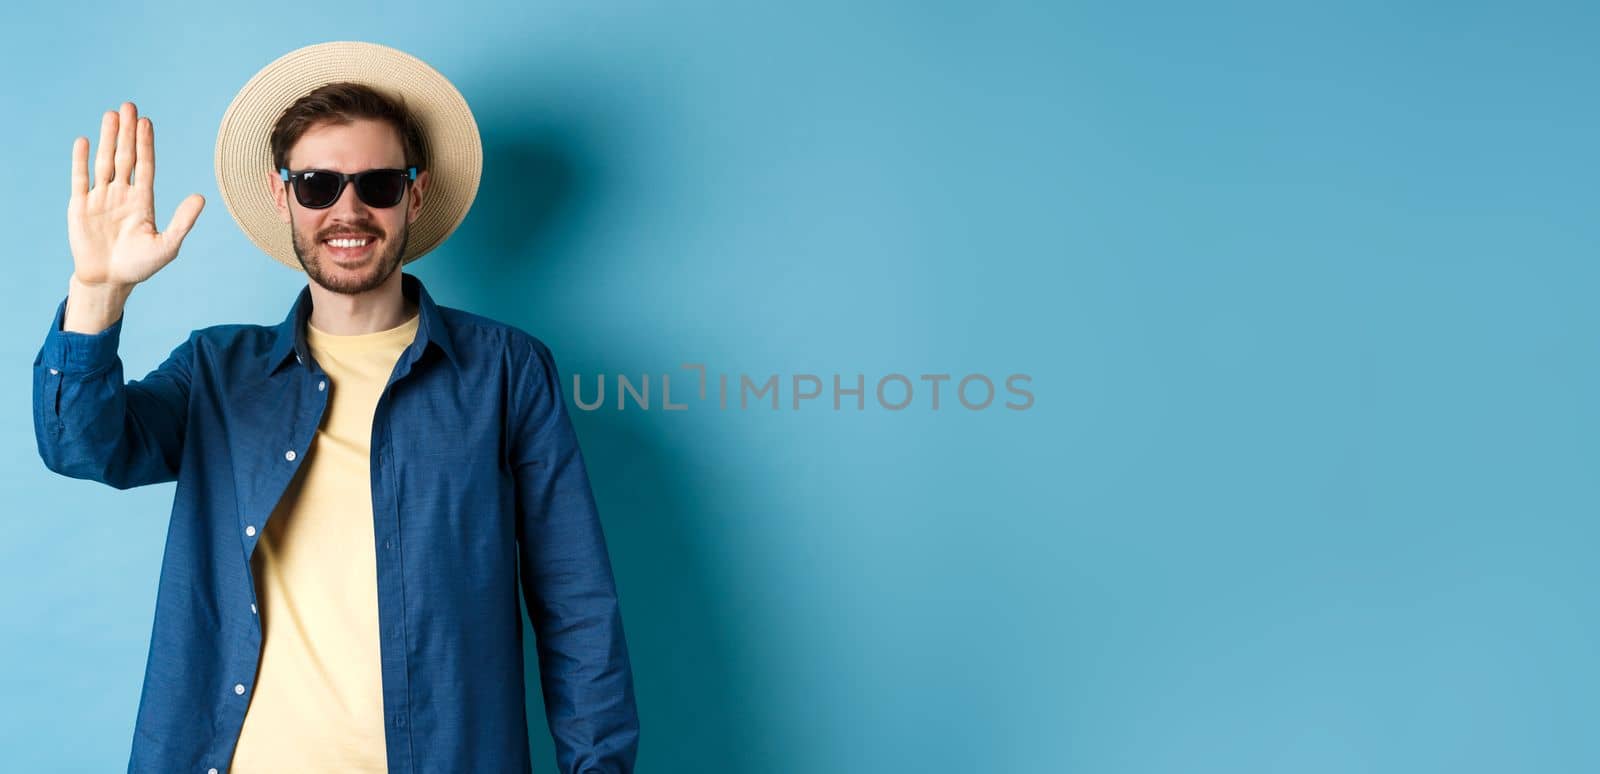 Handsome hipster on summer holiday, waiving hand and smiling, saying hello, wearing sunglasses and straw hat, blue background.